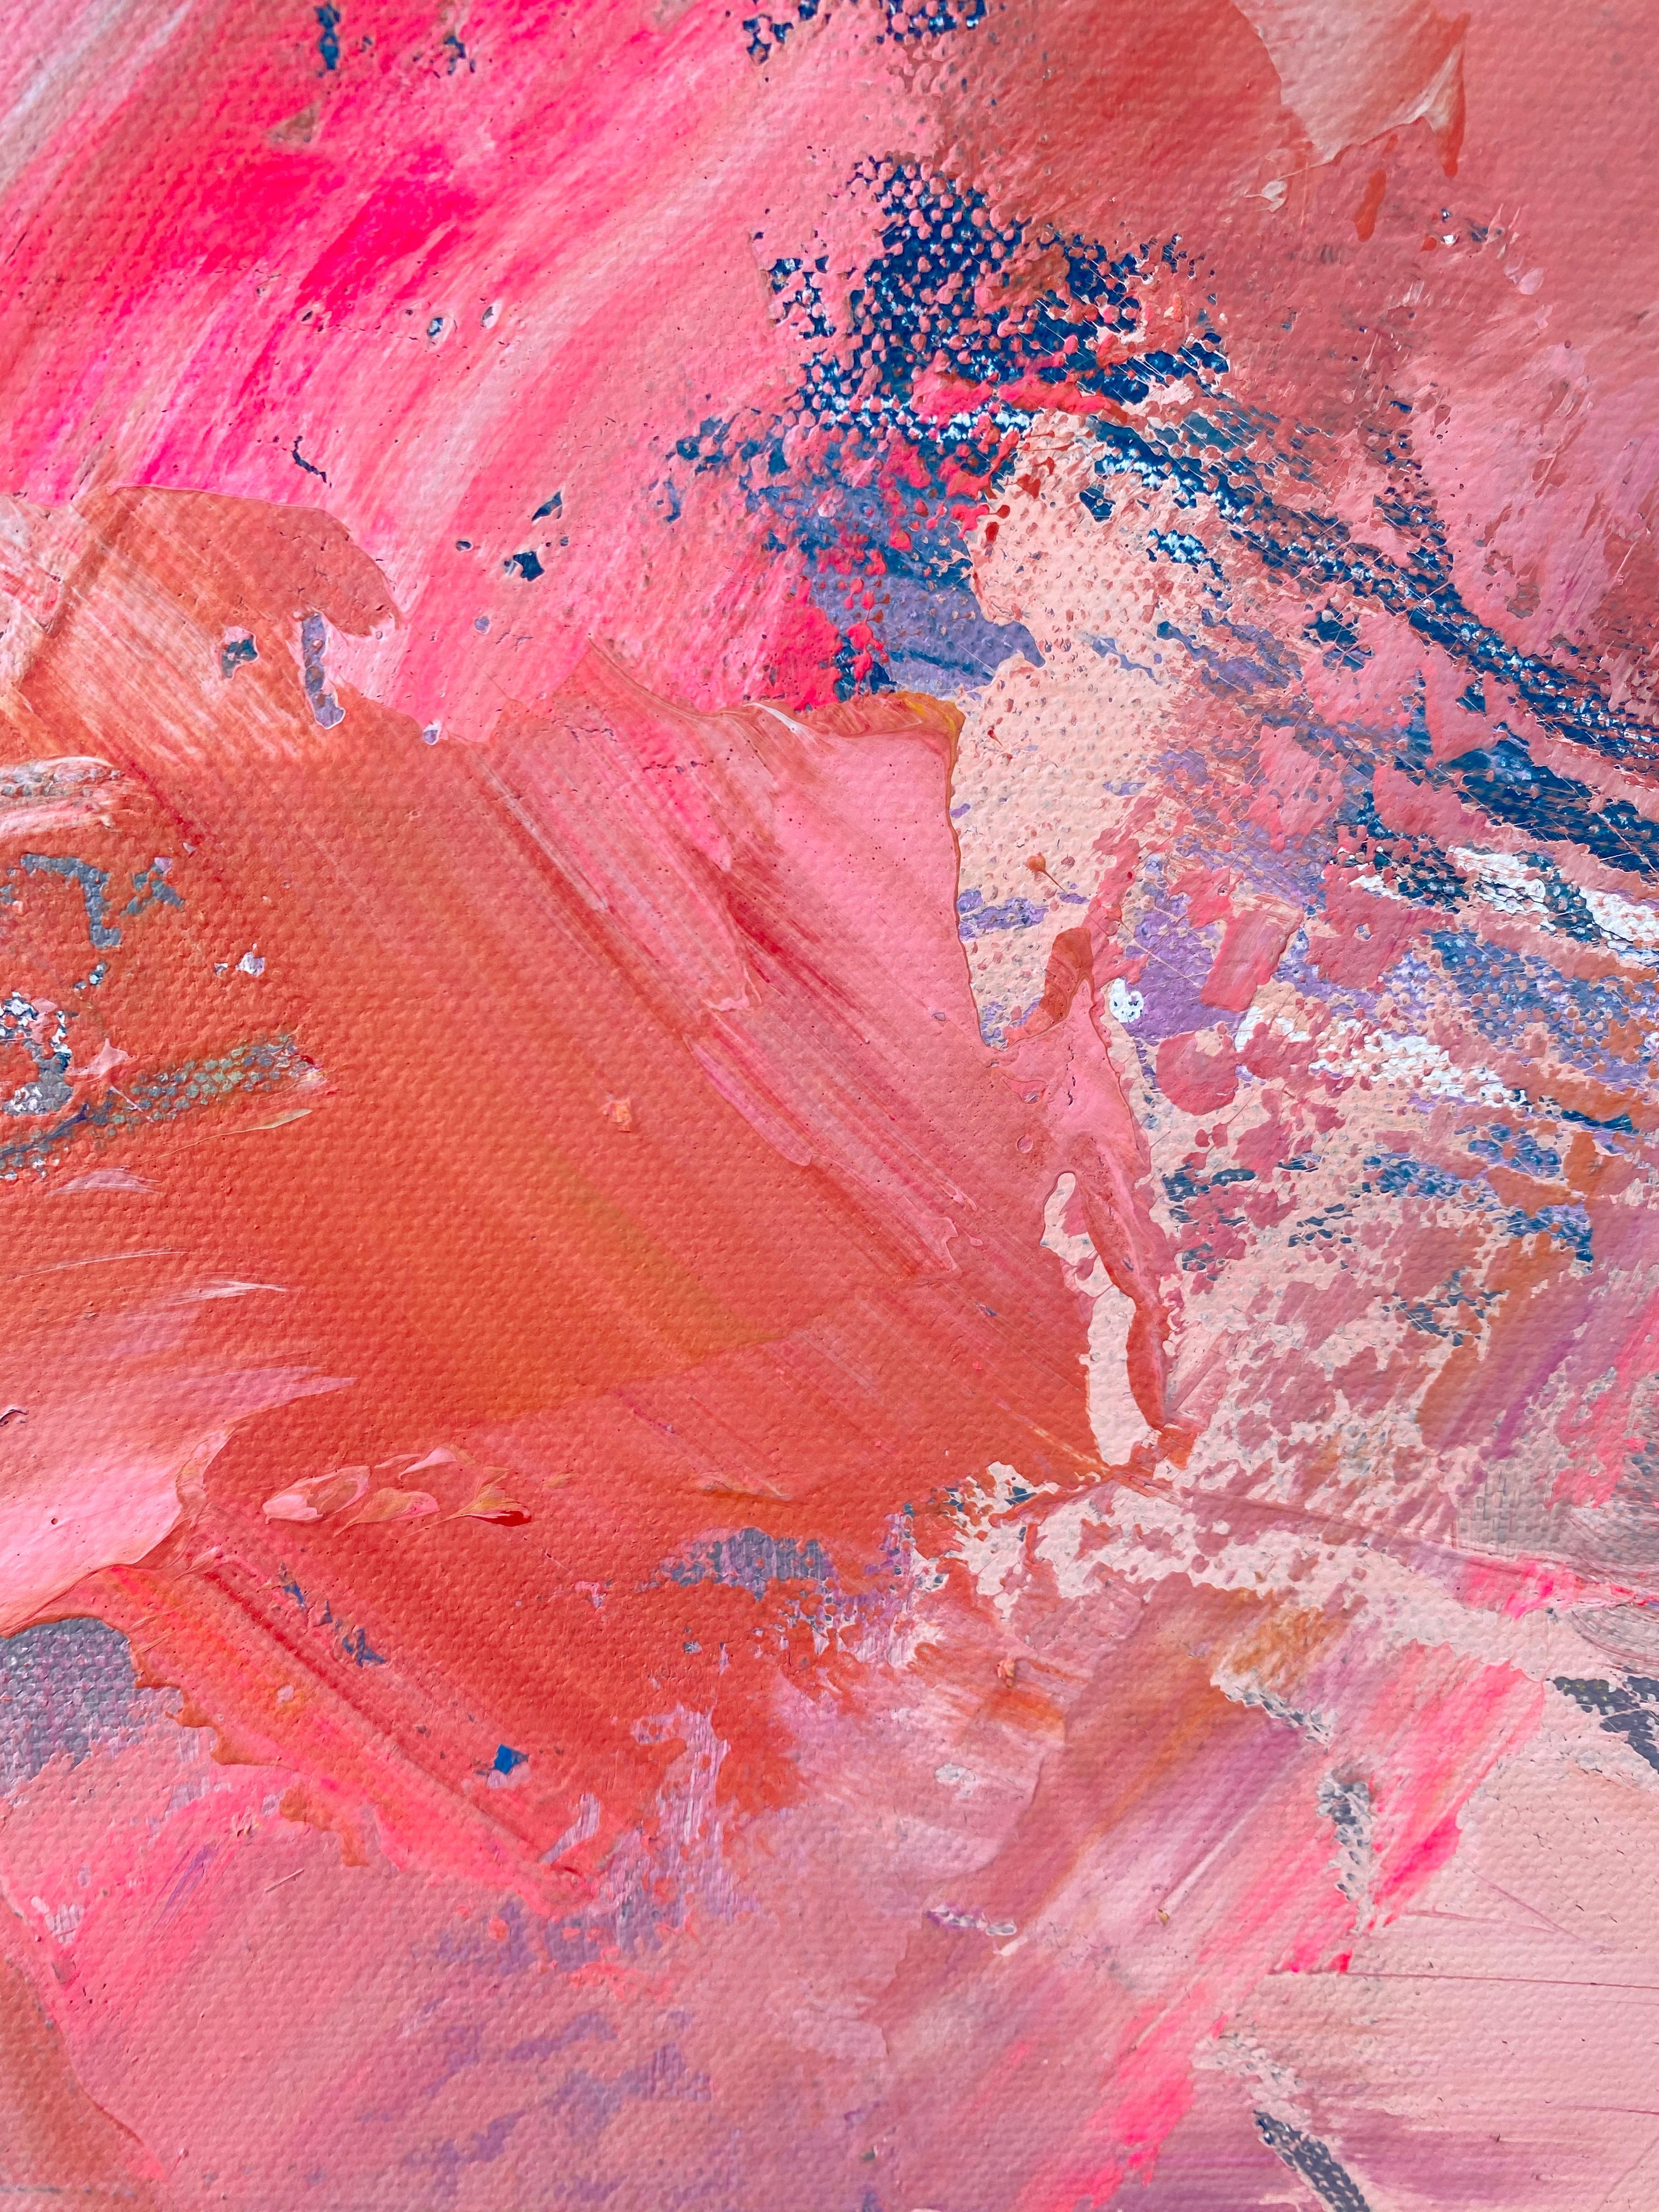 Acrylic On Canvas - Unframed.

This artwork is exclusive to IdeelArt.

American abstract painter Michelle Marra describes herself as a “spirited colorist,” a perfect expression of the high level of emotion, energy, and luminosity she imbues into her